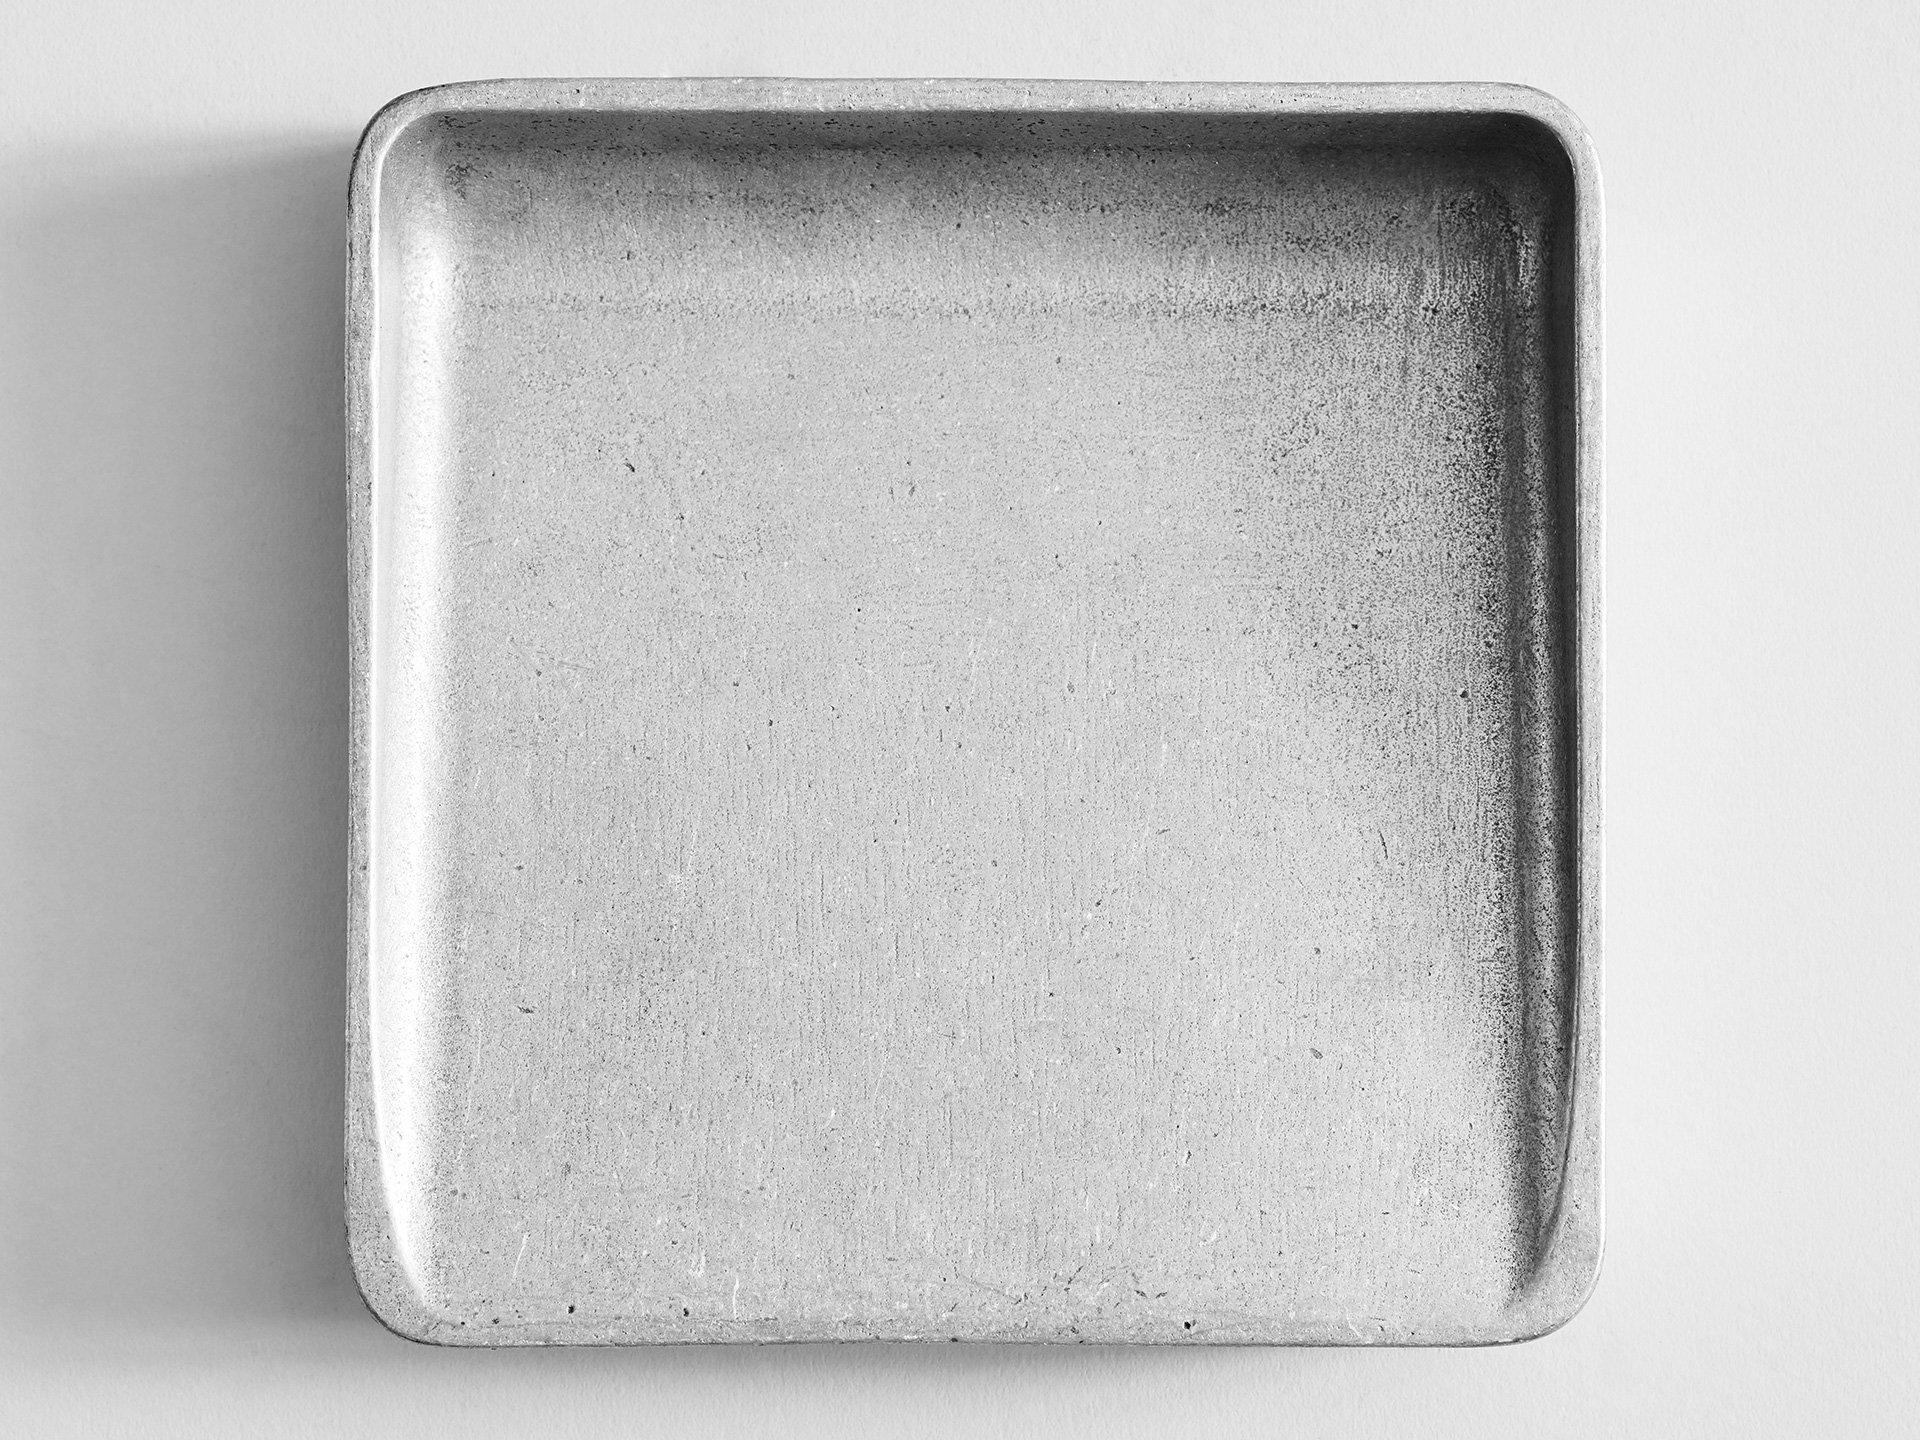 Aluminium Vide Poche Square by Henry Wilson
Dimensions: W 18 x D 18 x H 4 cm
Materials: Aluminium

Discard your day at the door.

Your Vide Poche is designed with your loose-pocket items in mind – think keys, change and phone. It is made, polished